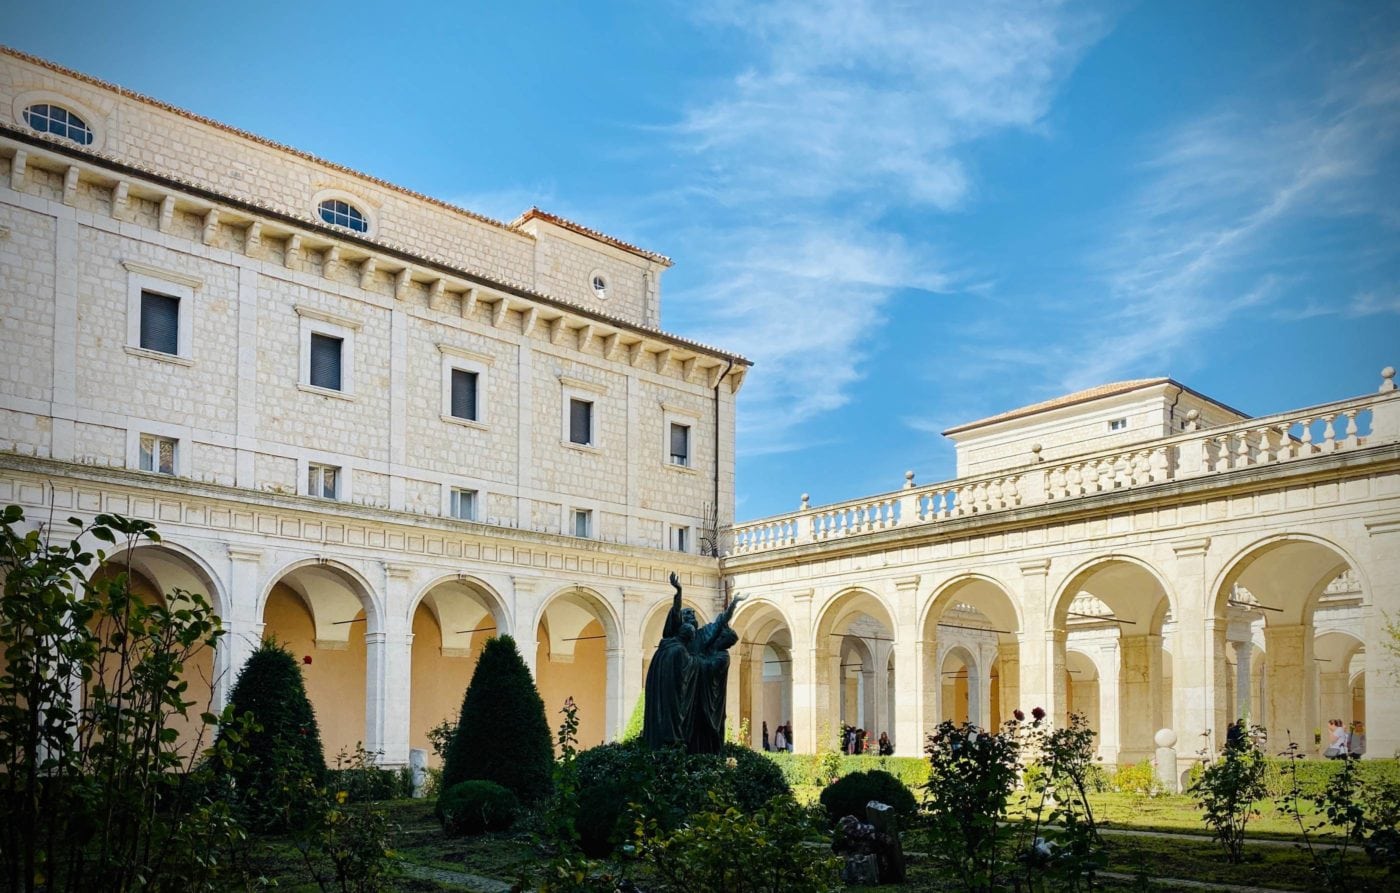 Montecassino Abbey: “A Special Place Indeed”